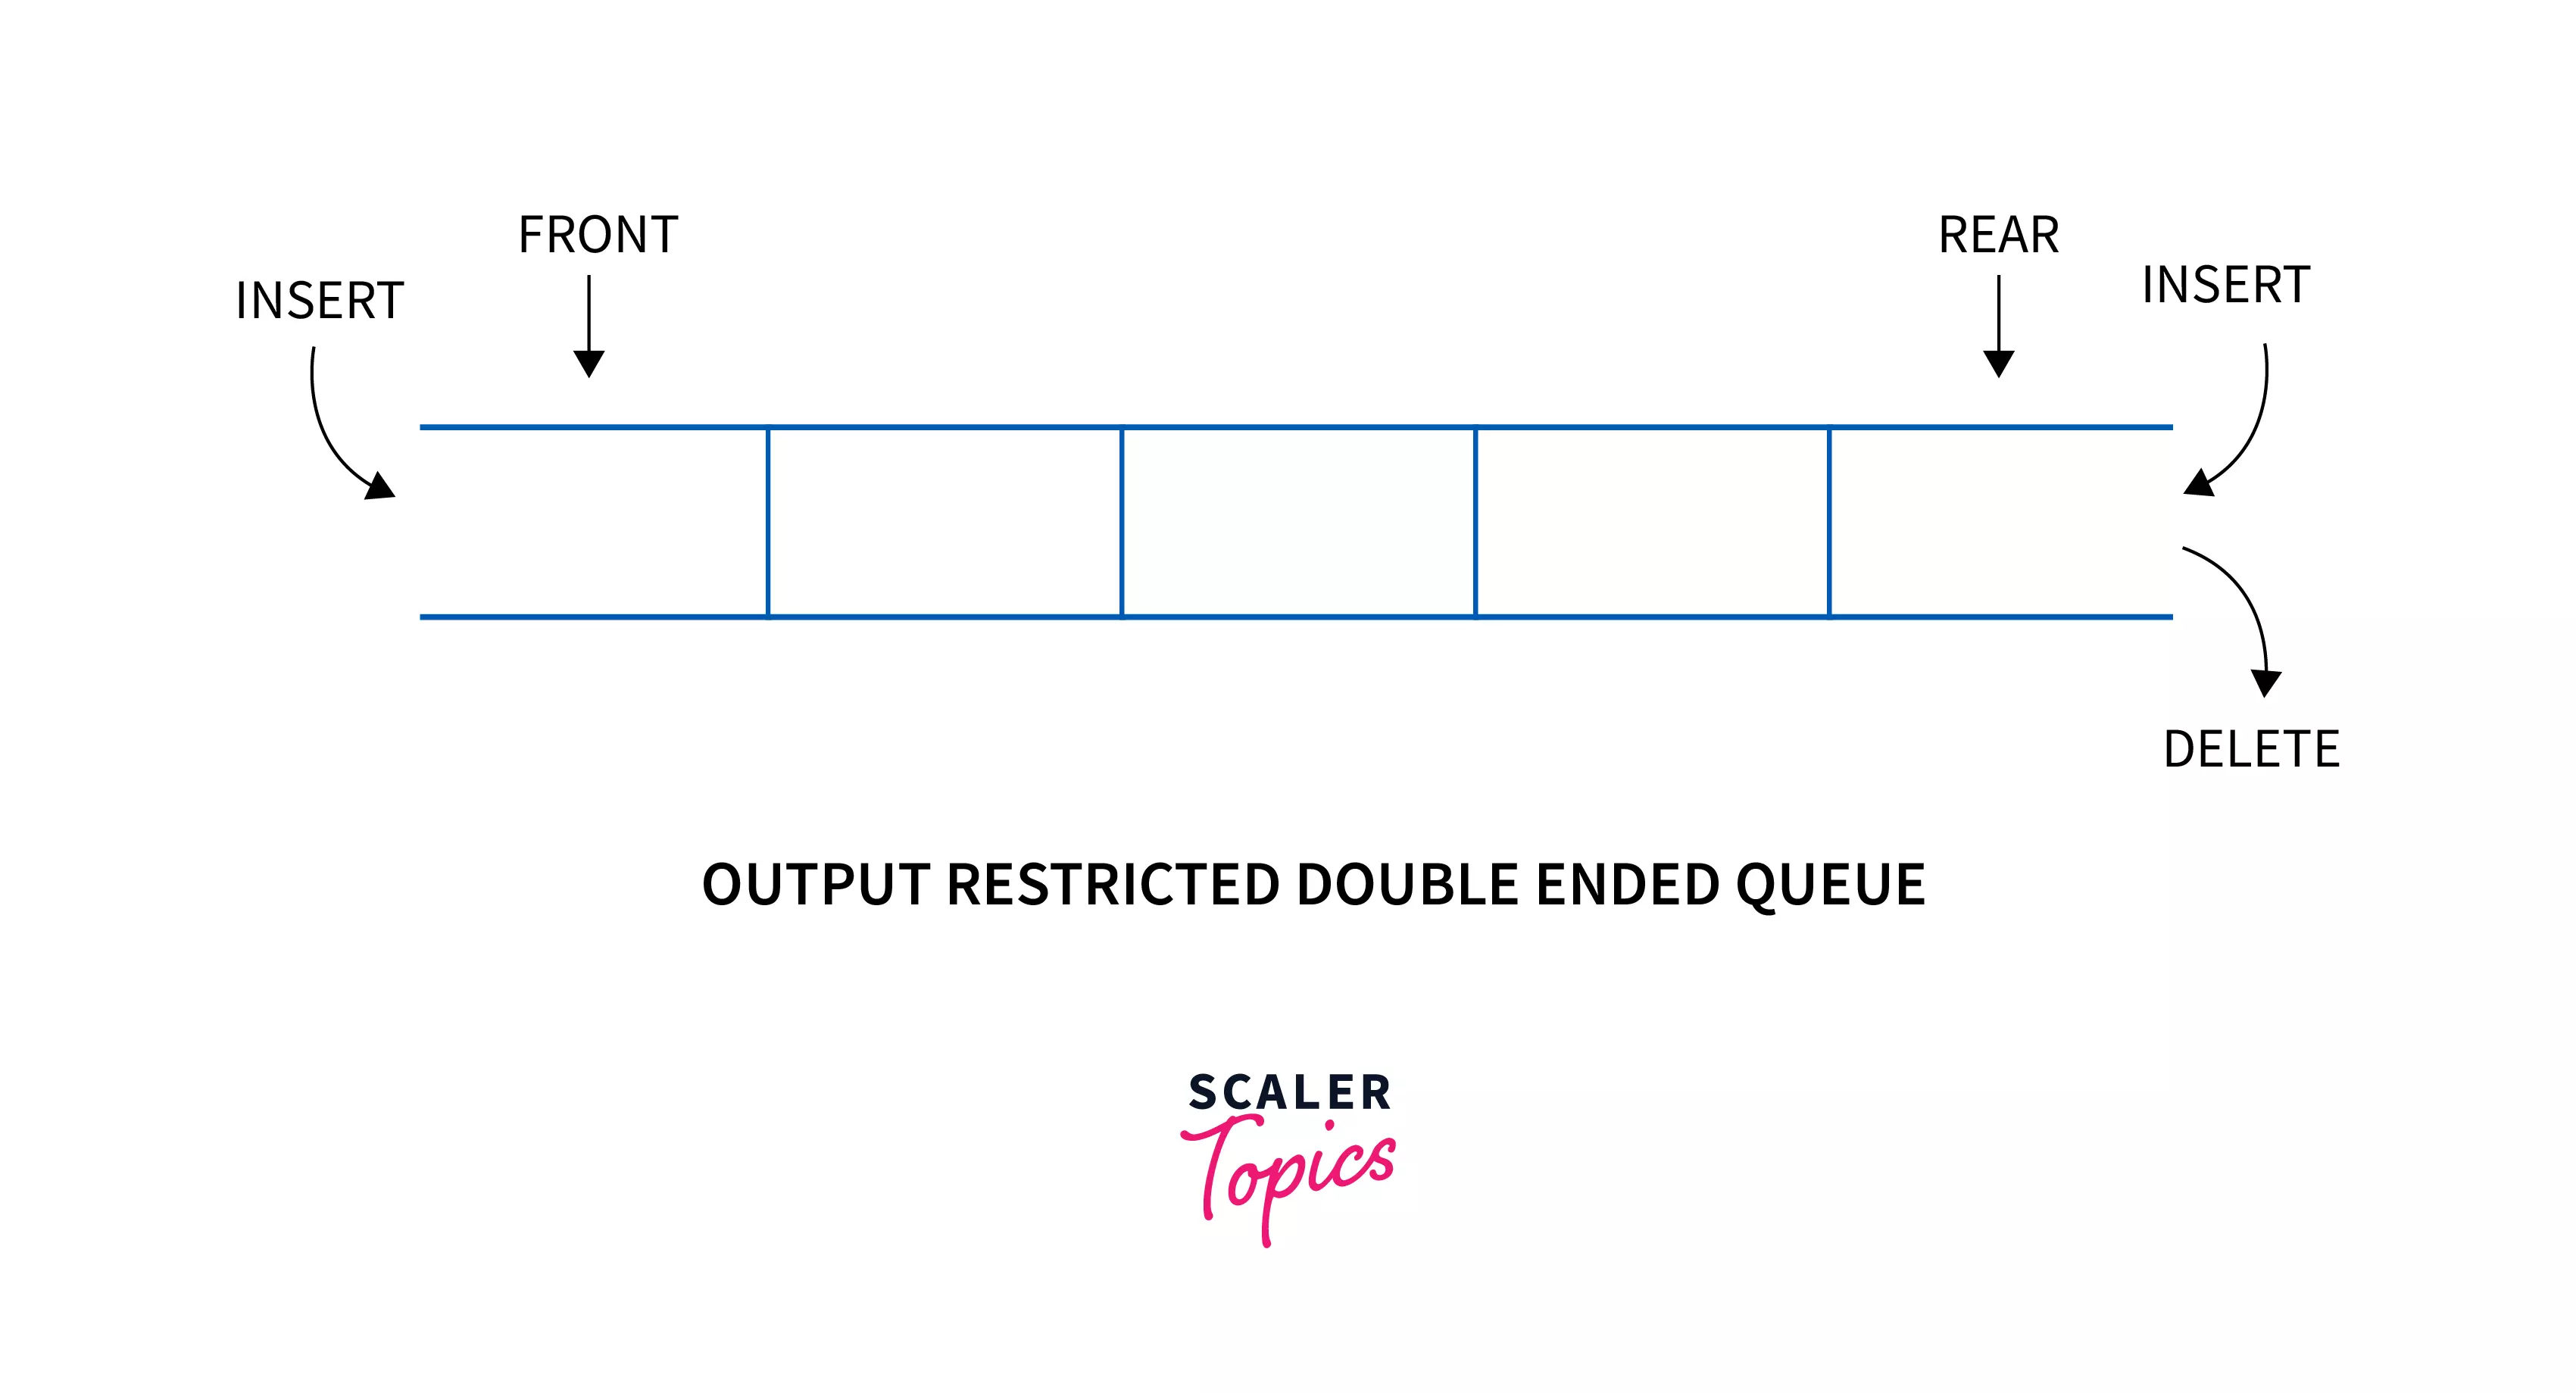 Output restricted queue